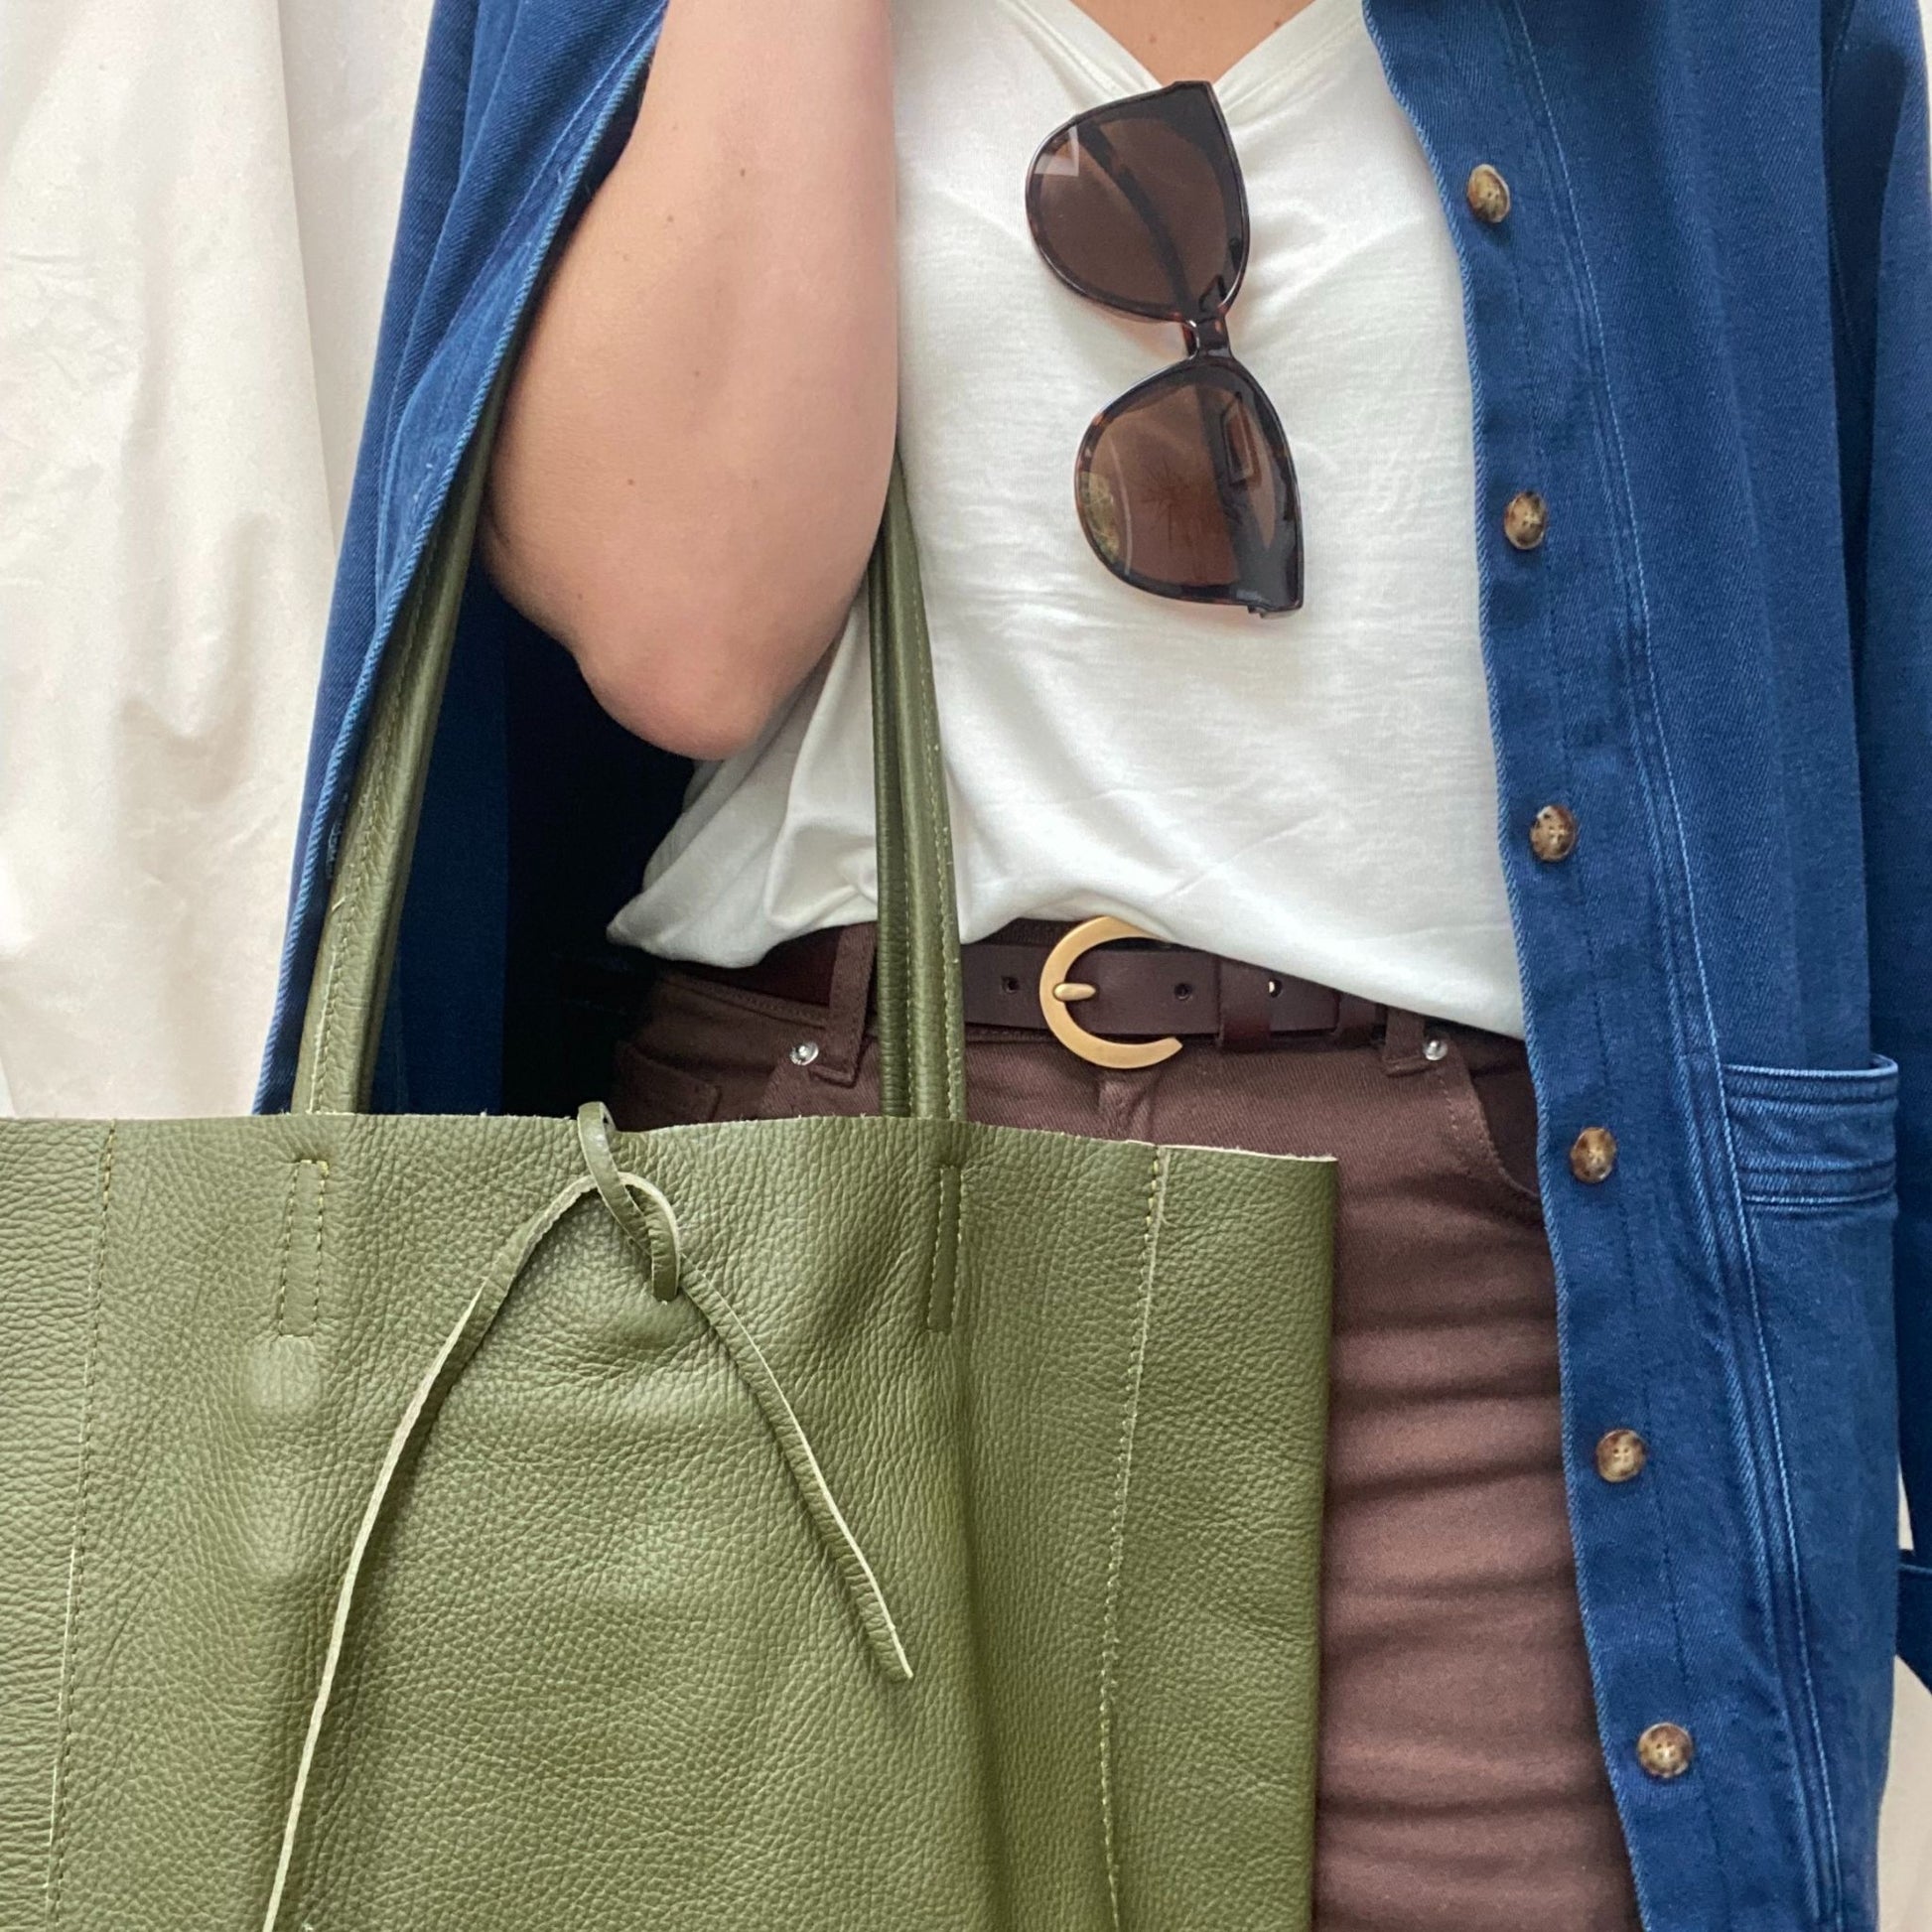 Lady holding green leather bag 